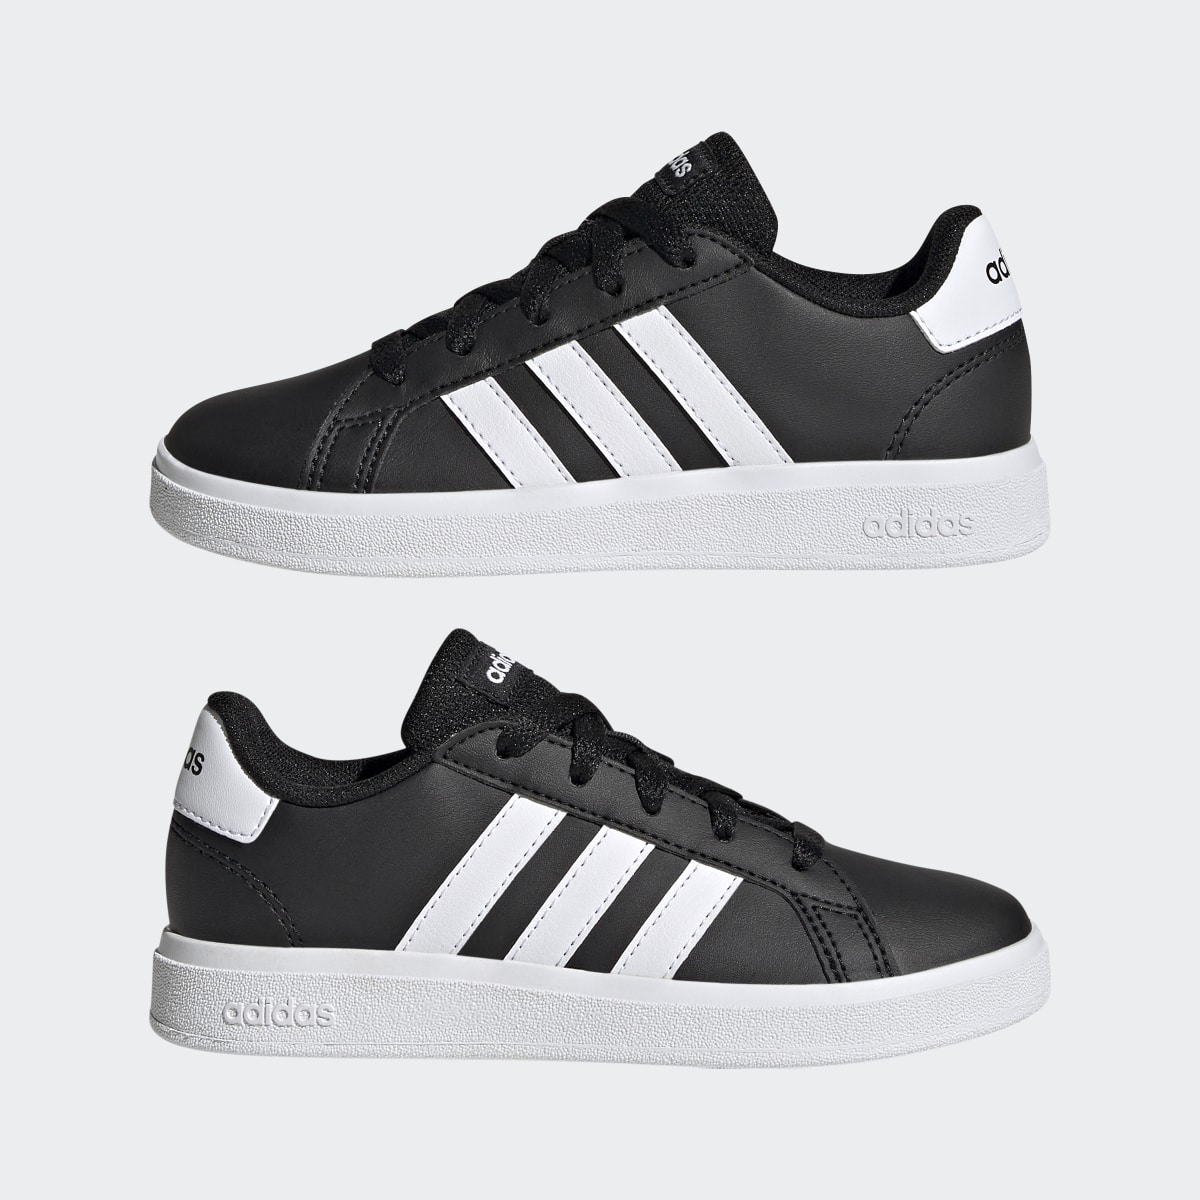 Adidas Grand Court Lace-Up Shoes. 8